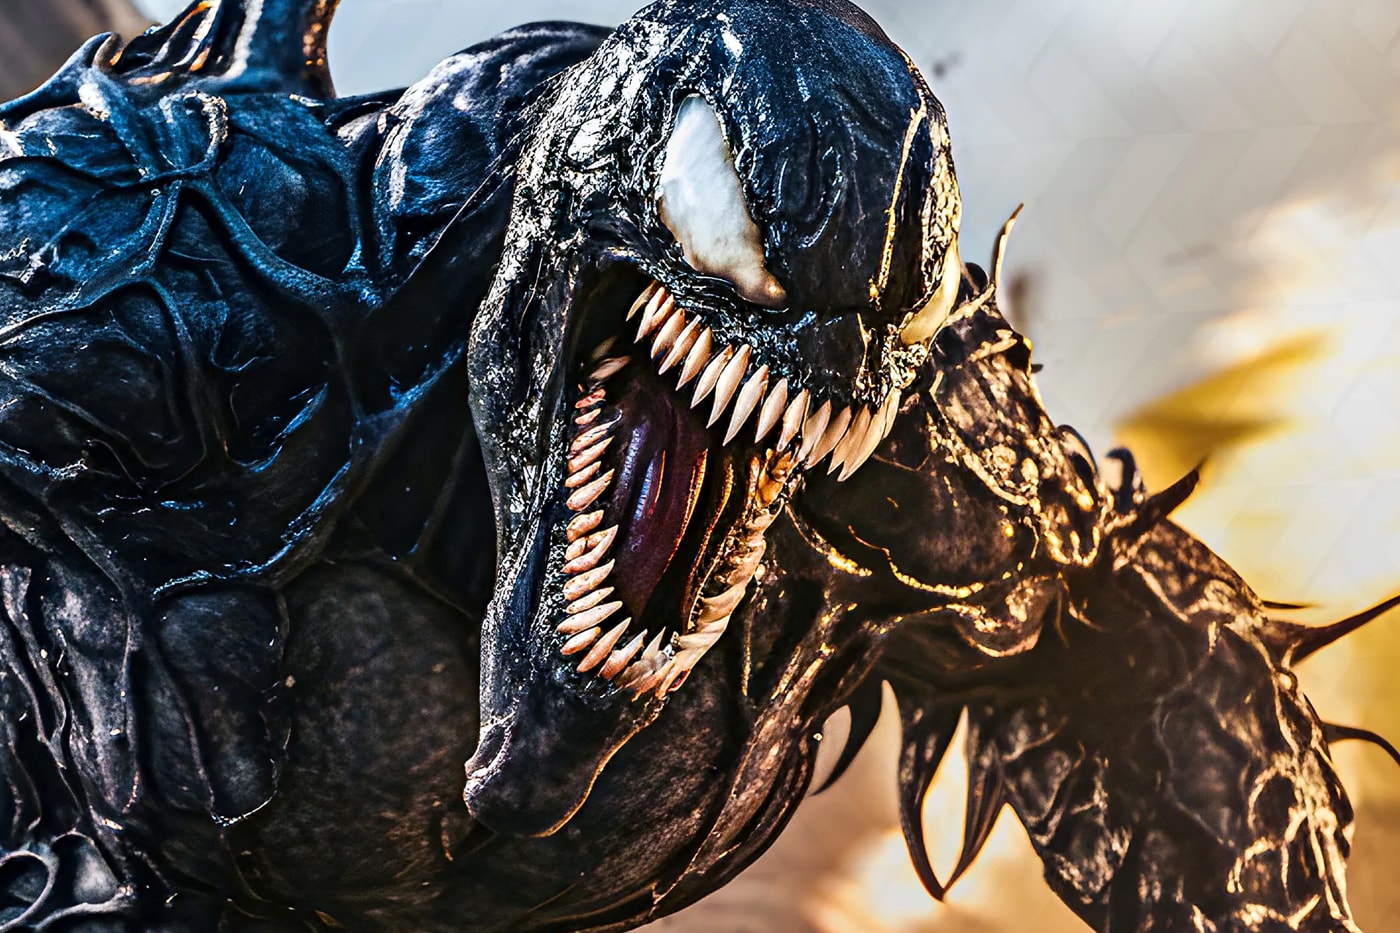 Tom Hardy Shares 'Venom 3' Update, Confirming It Has Resumed Production delayed release date spider-man trilogy let ther be carnage kelly marcel